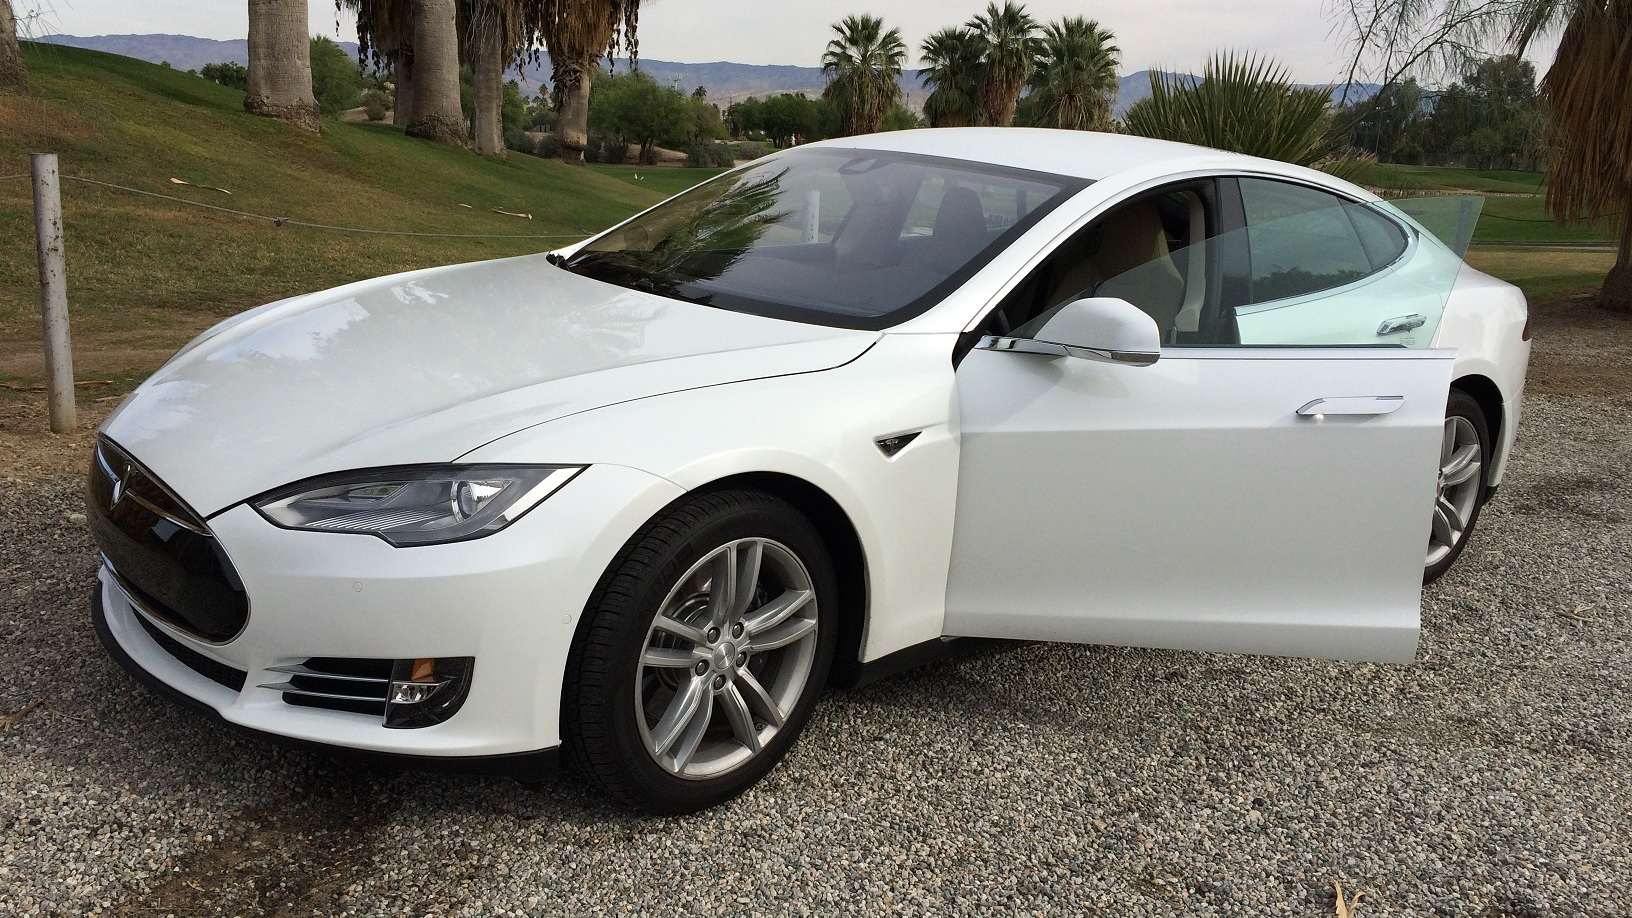 2014 Tesla Model S owned by Tom + Jeff of Palm Springs, California